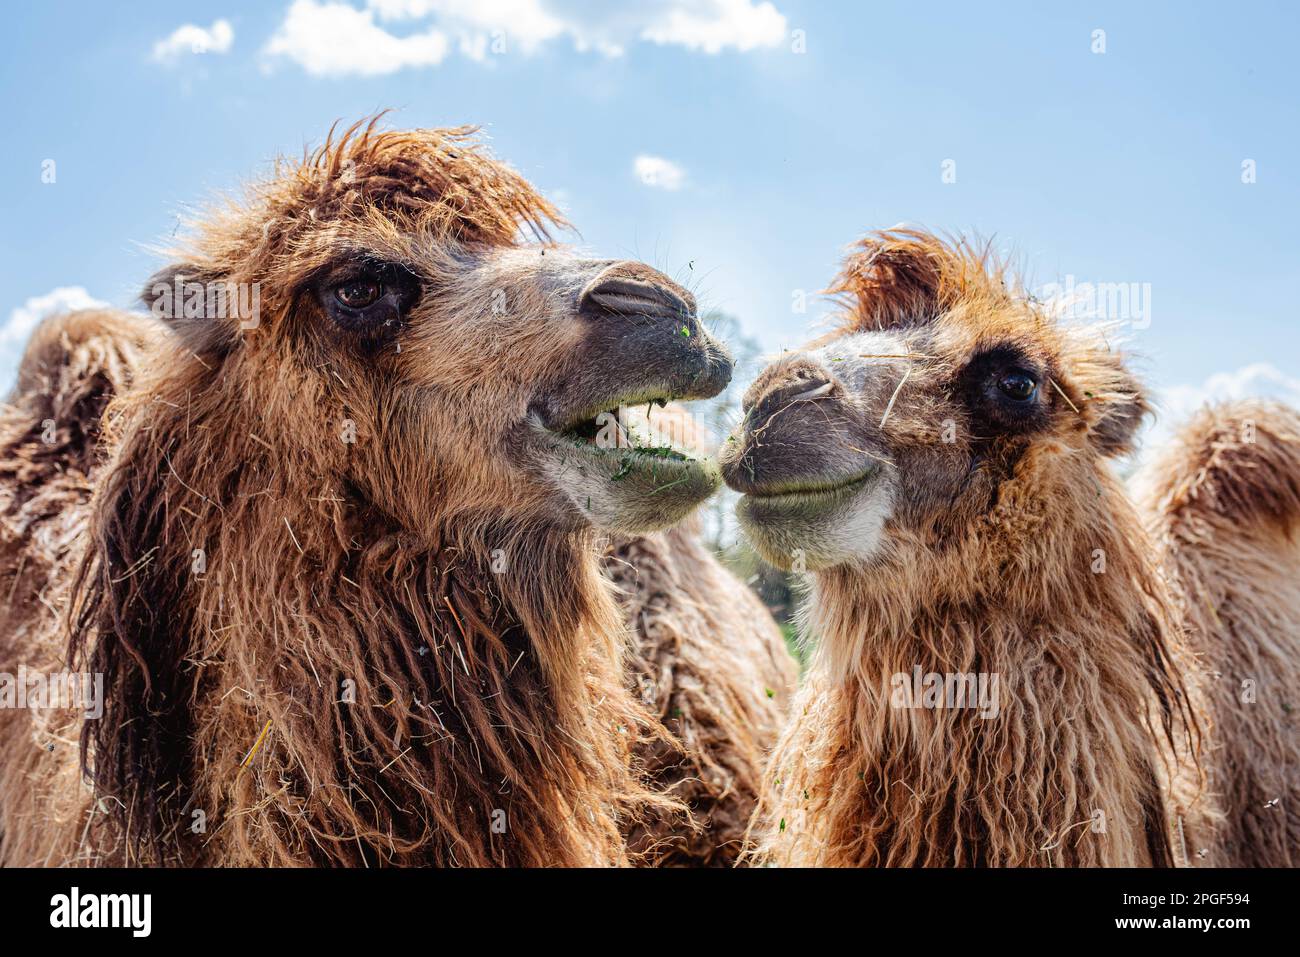 wo humped camels enjoying a sunny day eating grass in safari, they look funny, very bright and good looking photo, camels are smiling to each other Stock Photo